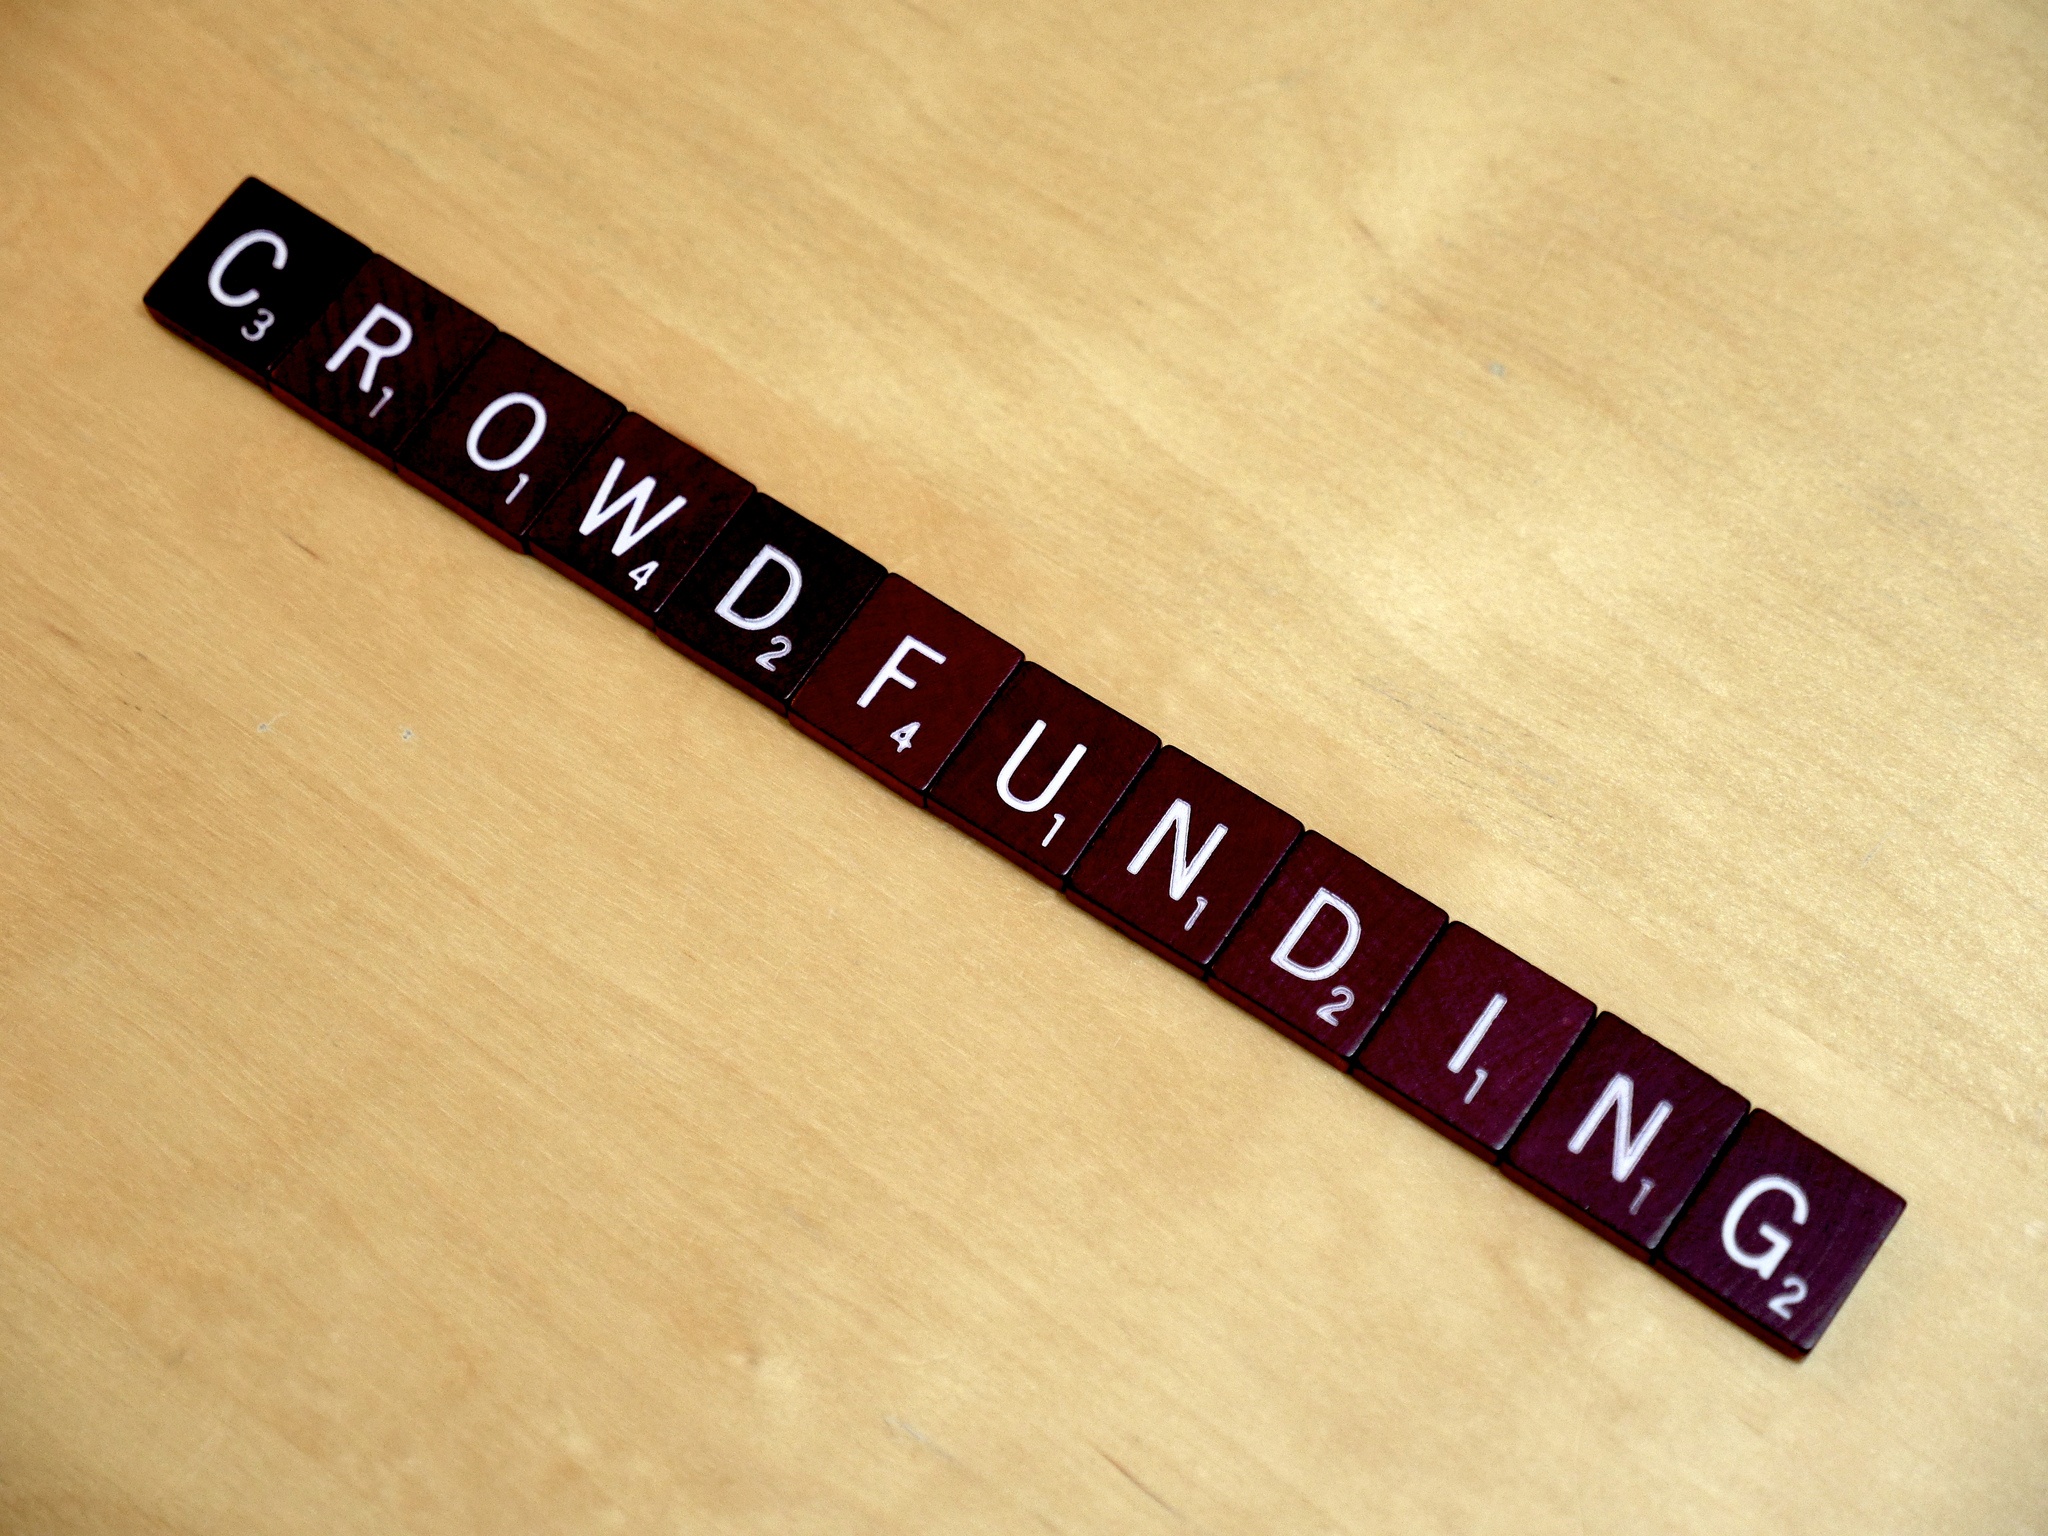 Top 8 Crowdfunding Sites You Should Know About